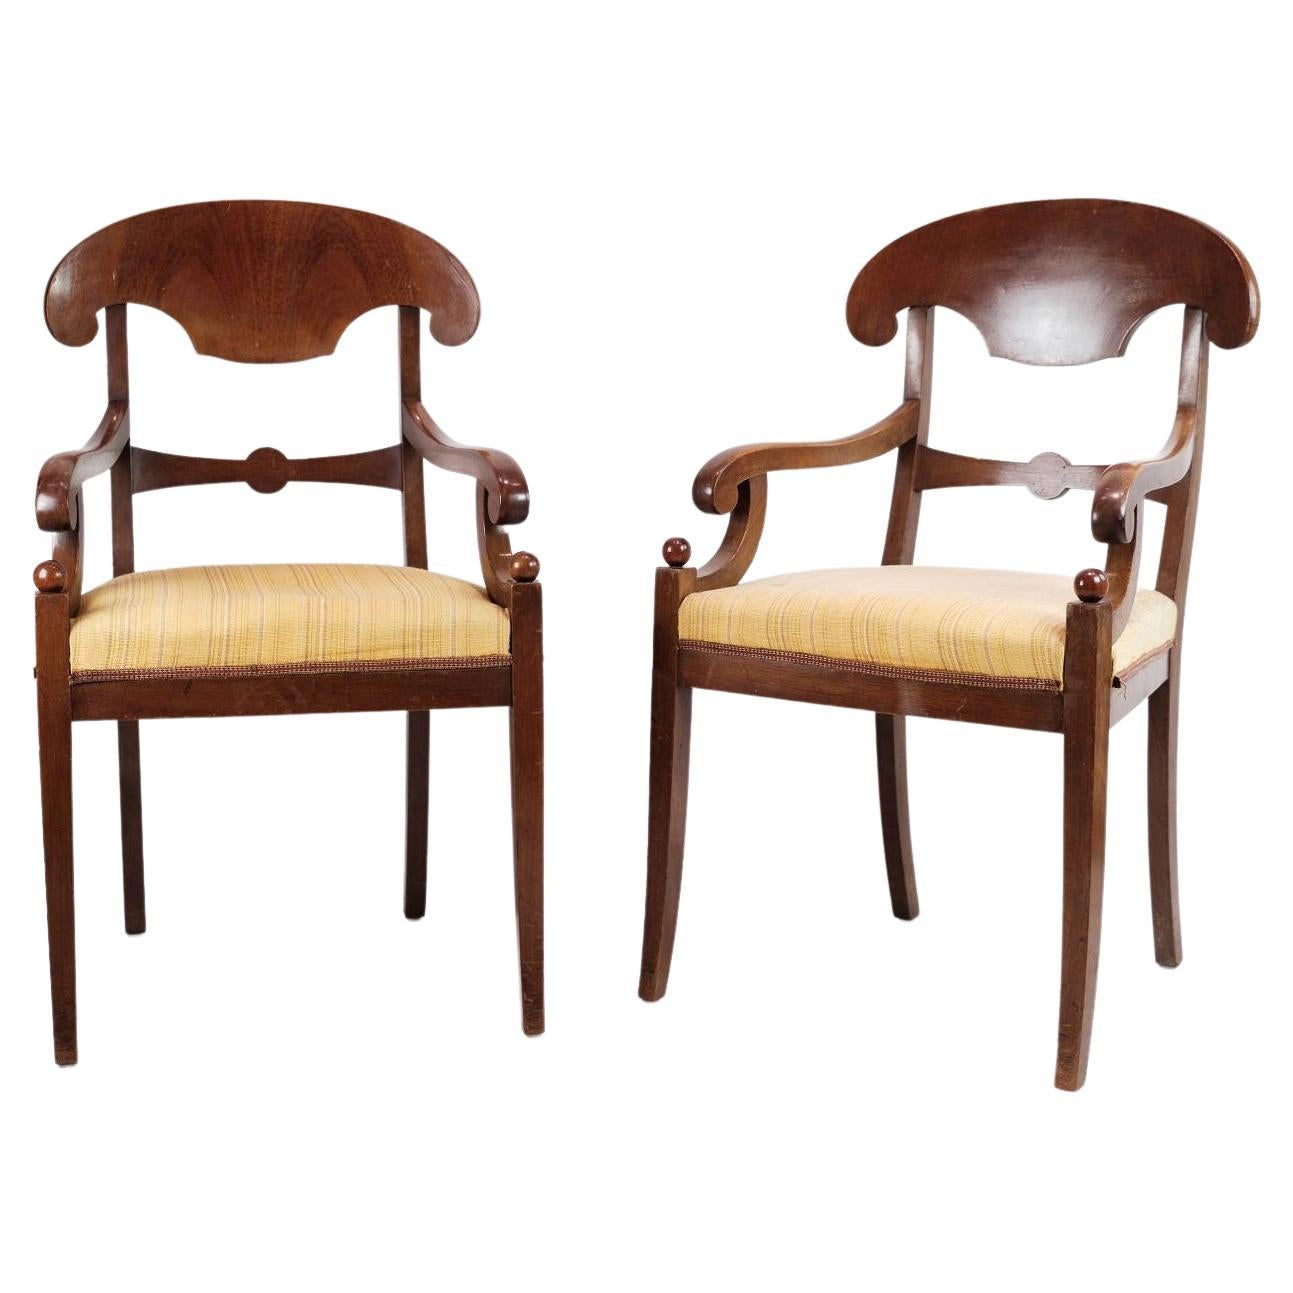 Set Of 2 Armchairs Made In Mahogany With Light Fabric From 1860s For Sale